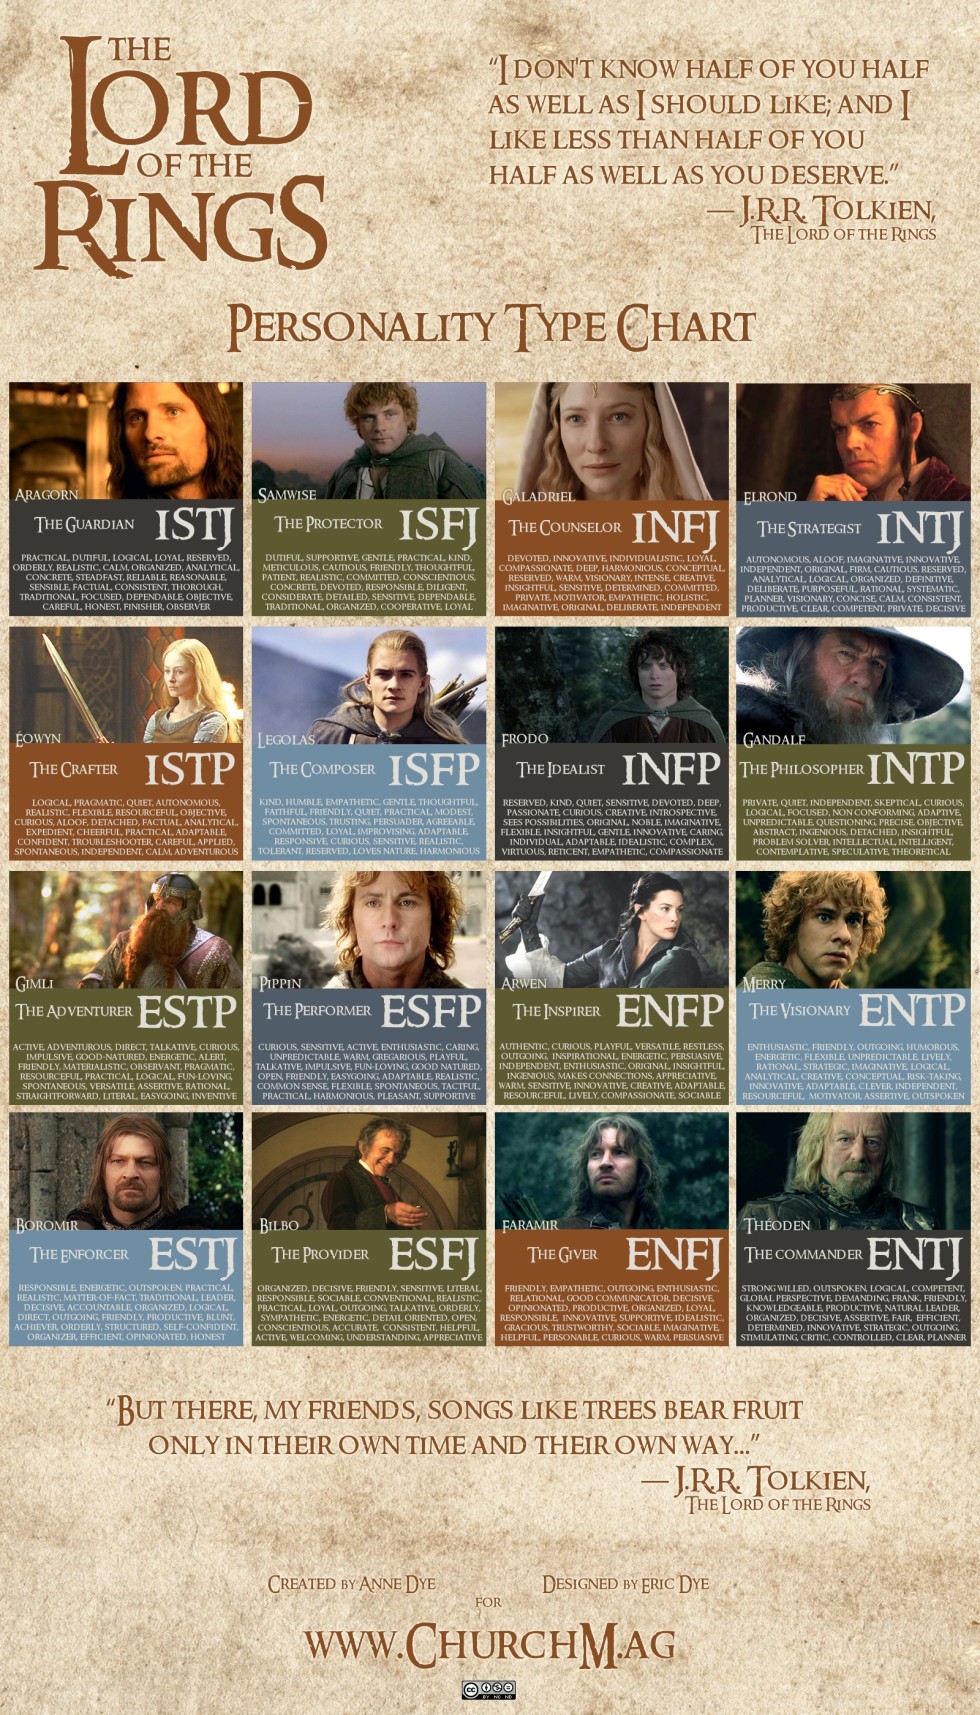 Fan Casting King Clawthorne as ENTJ in MBTI Personality Types for Fictional  Characters on myCast